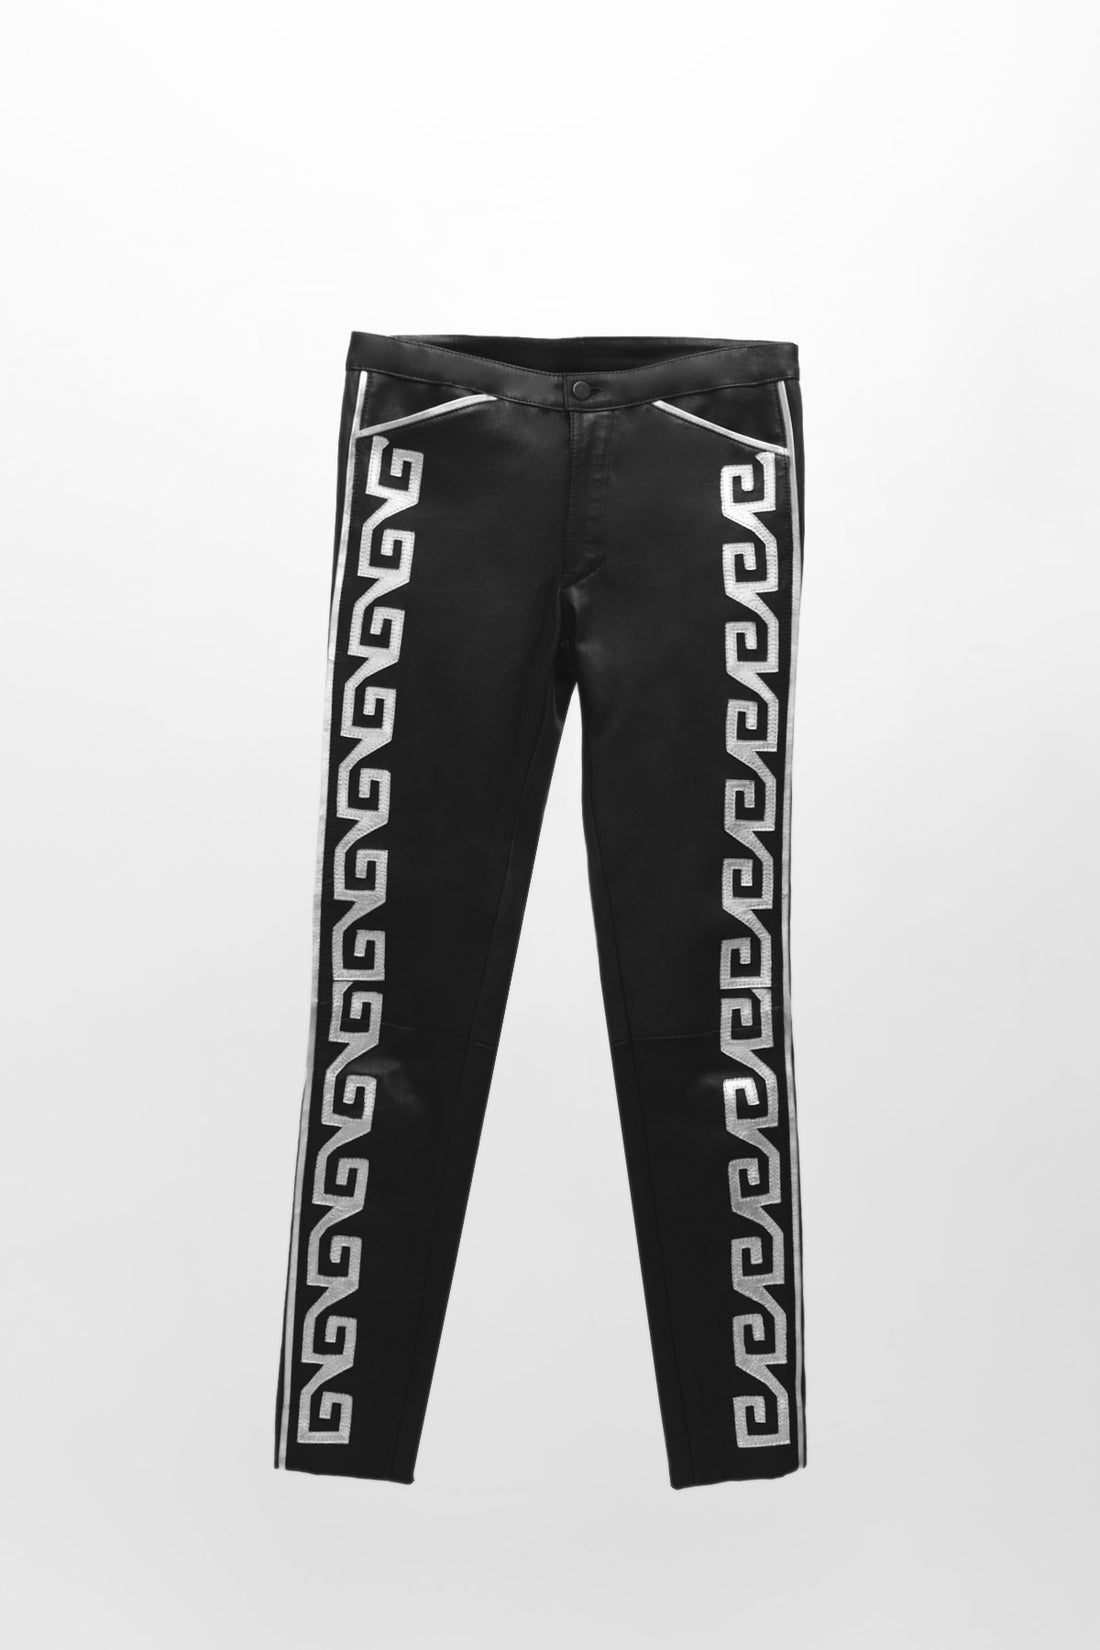 Grecas Silver Trousers